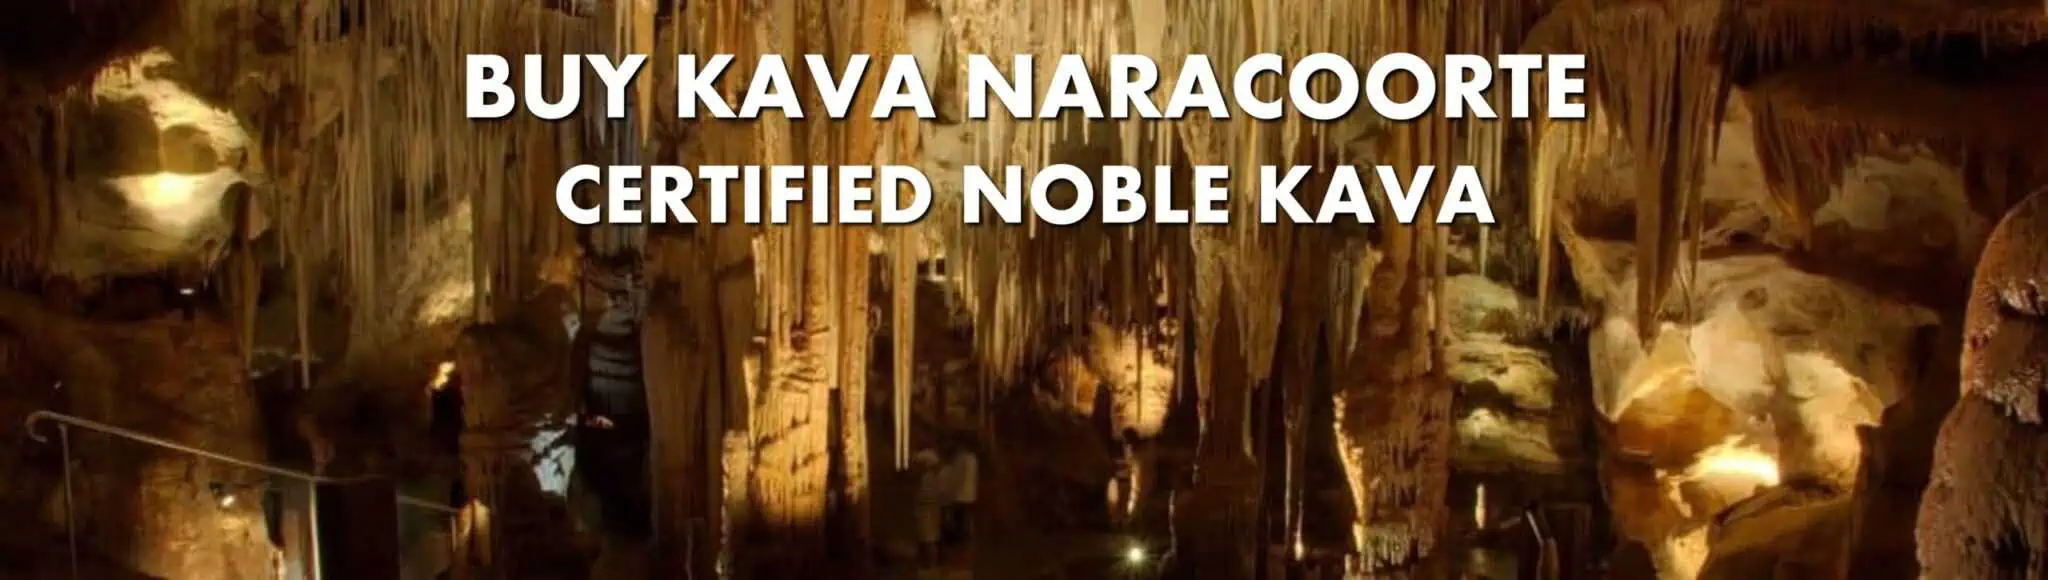 Cave in Naracoorte South Australia with caption Buy Kava Naracoorte Certified Noble Kava